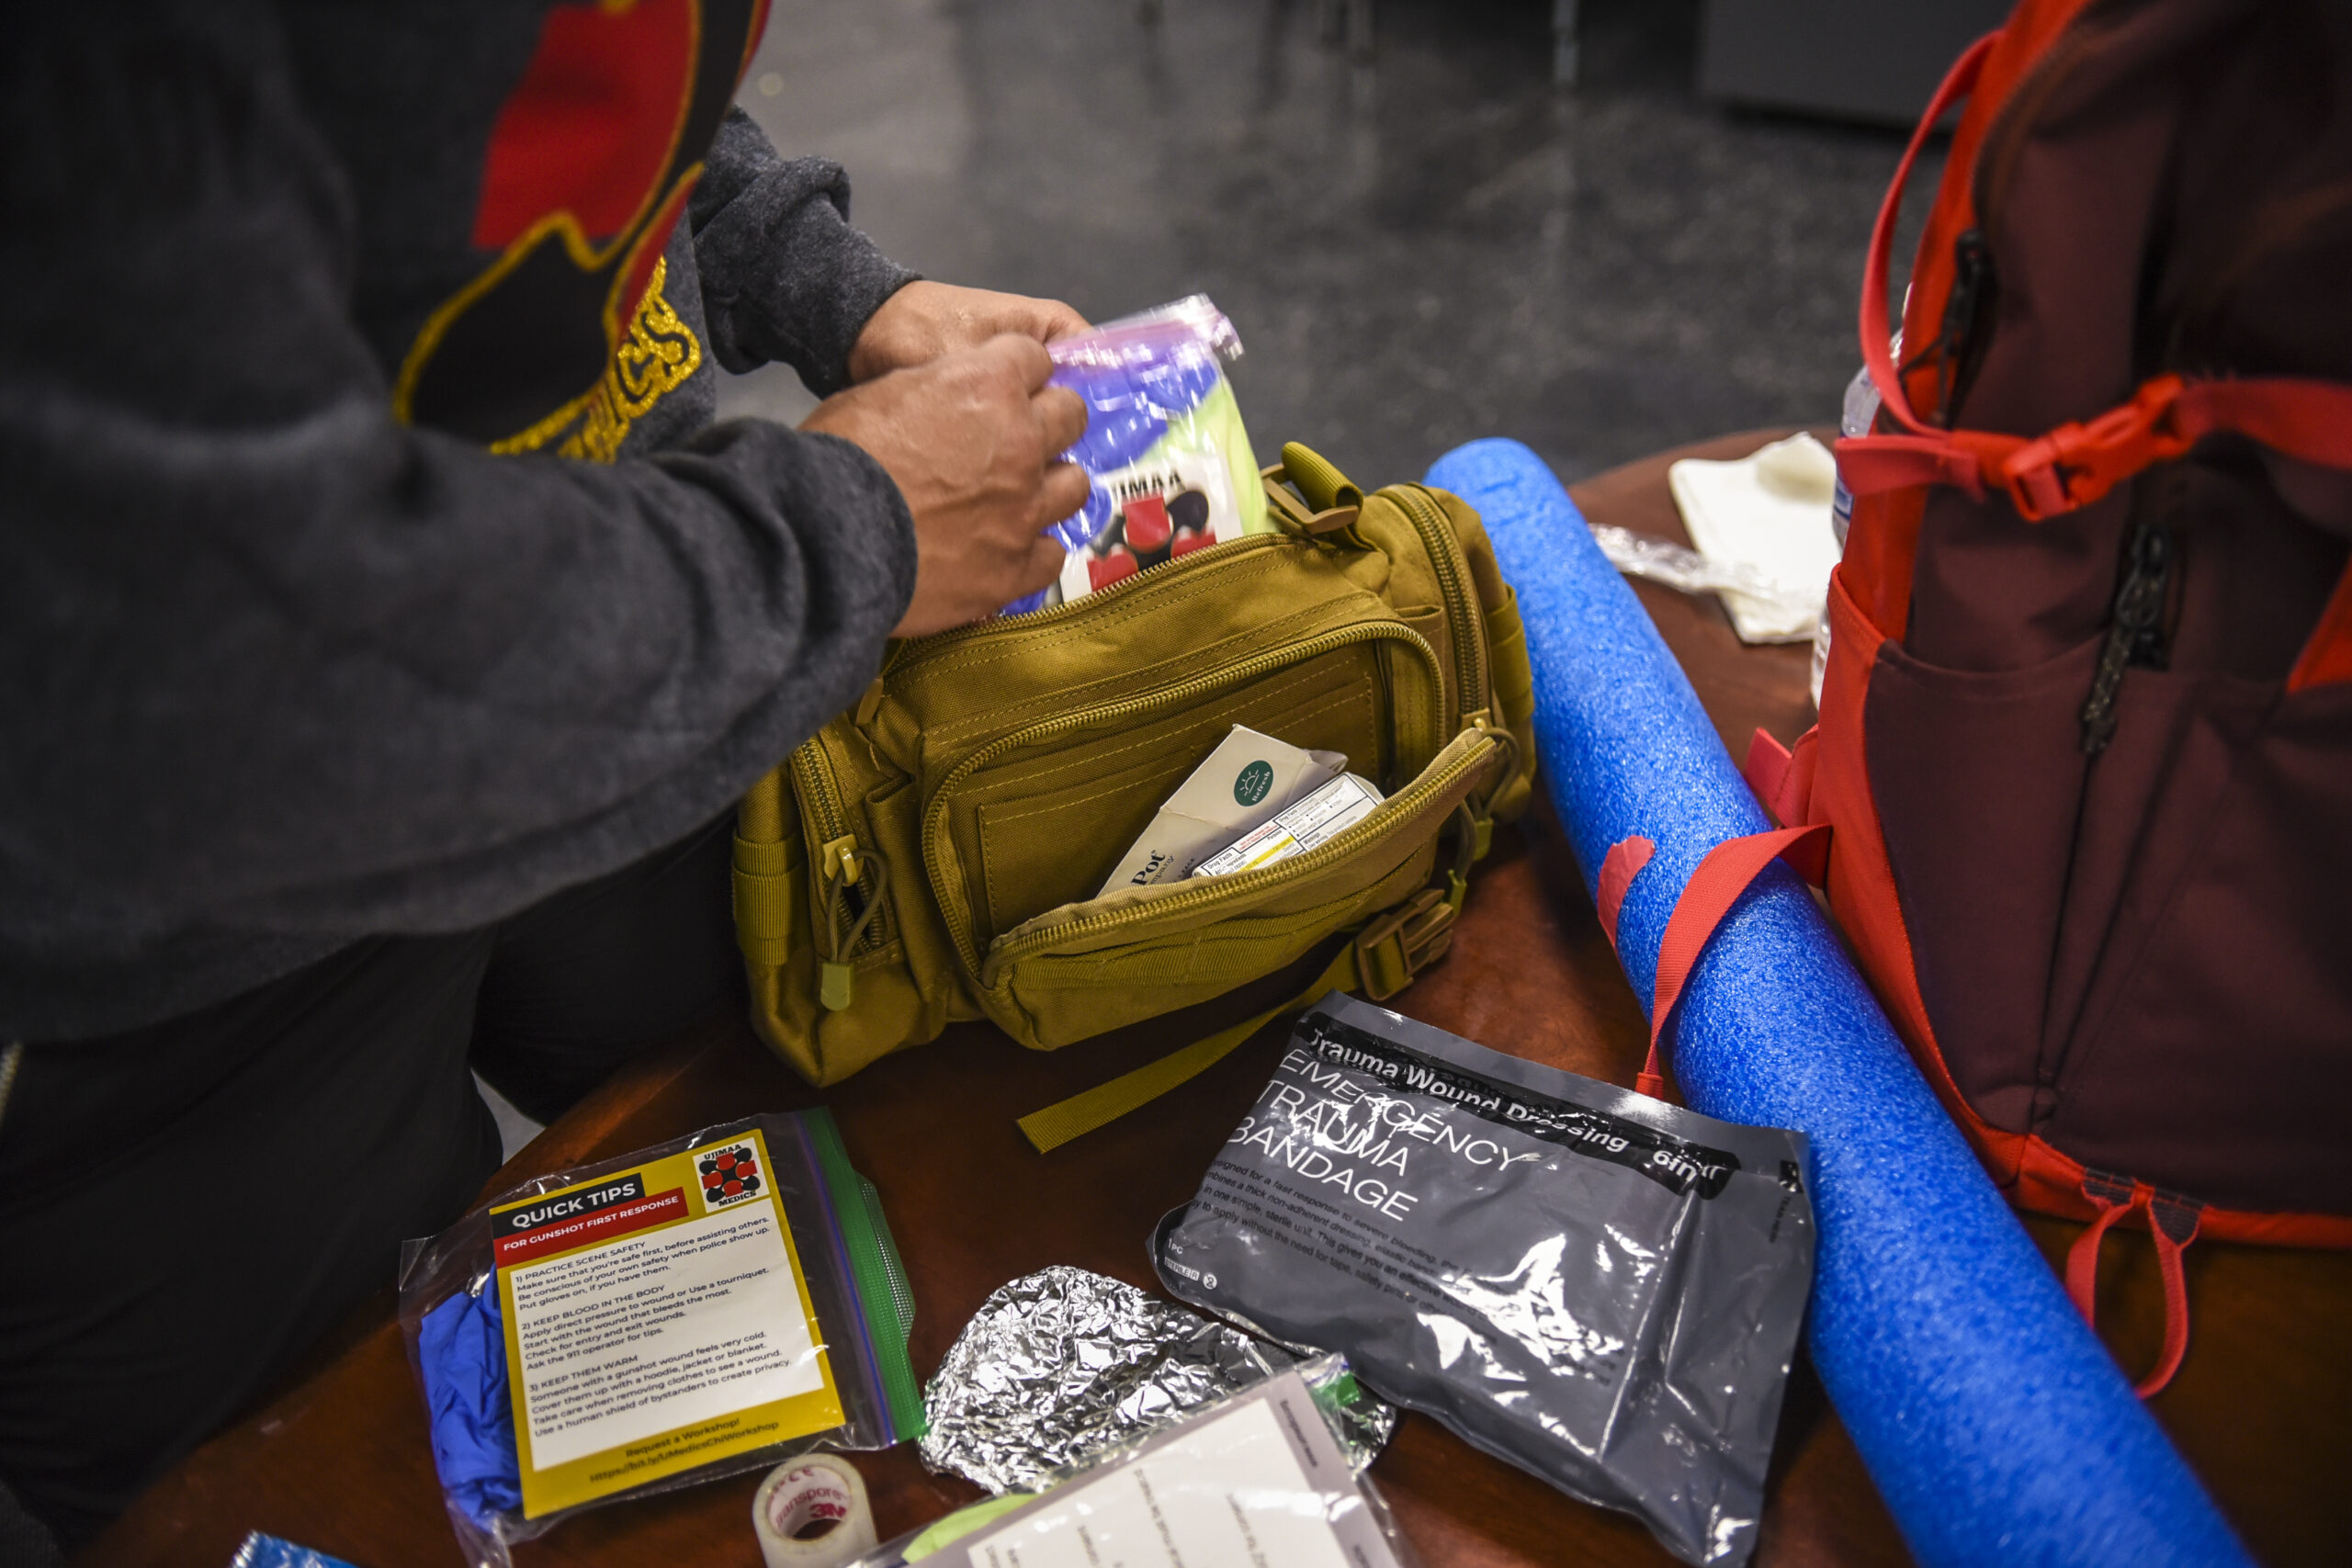 A person unpacks supplies from a medical kit, including an emergency trauma bandage.